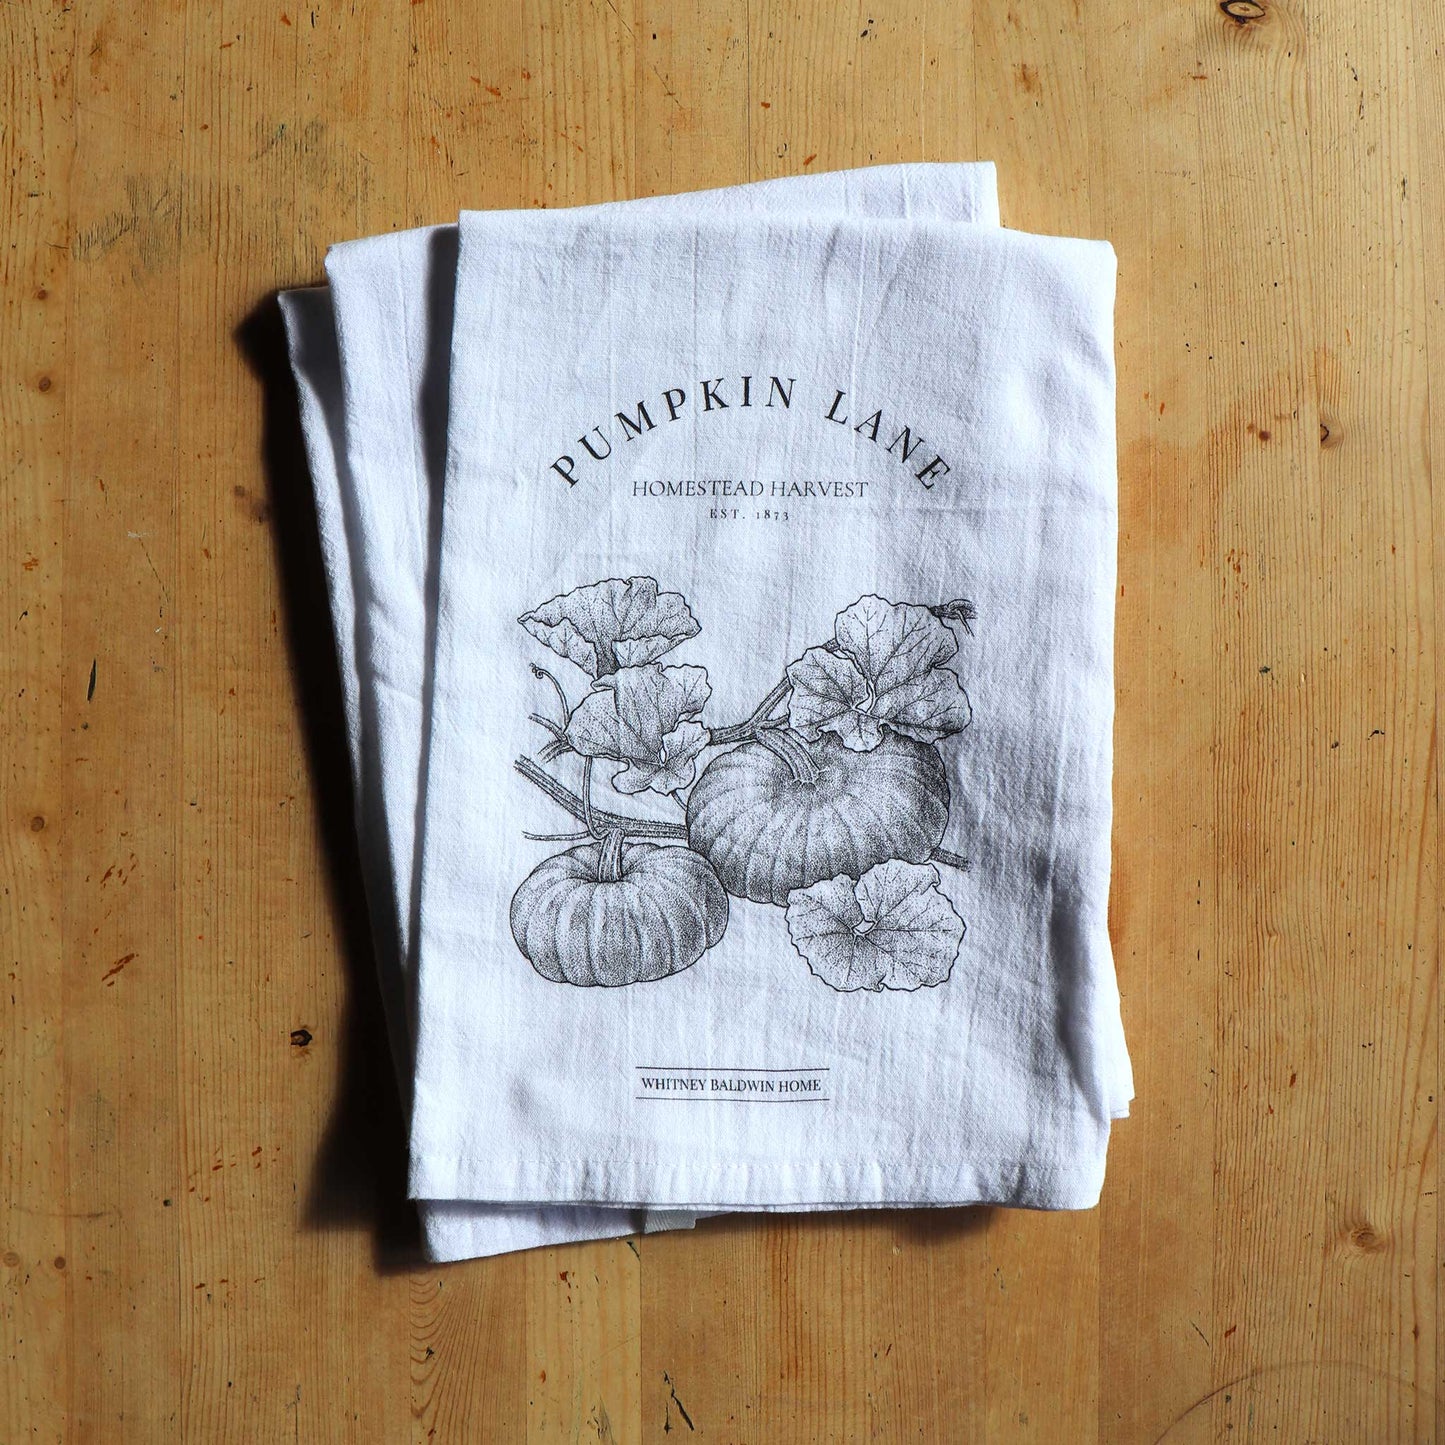 Homestead Harvest Pumpkin Lane Tea Towel. This pumpkin patch tea towel is stacked on top of the other teatowels in this collection